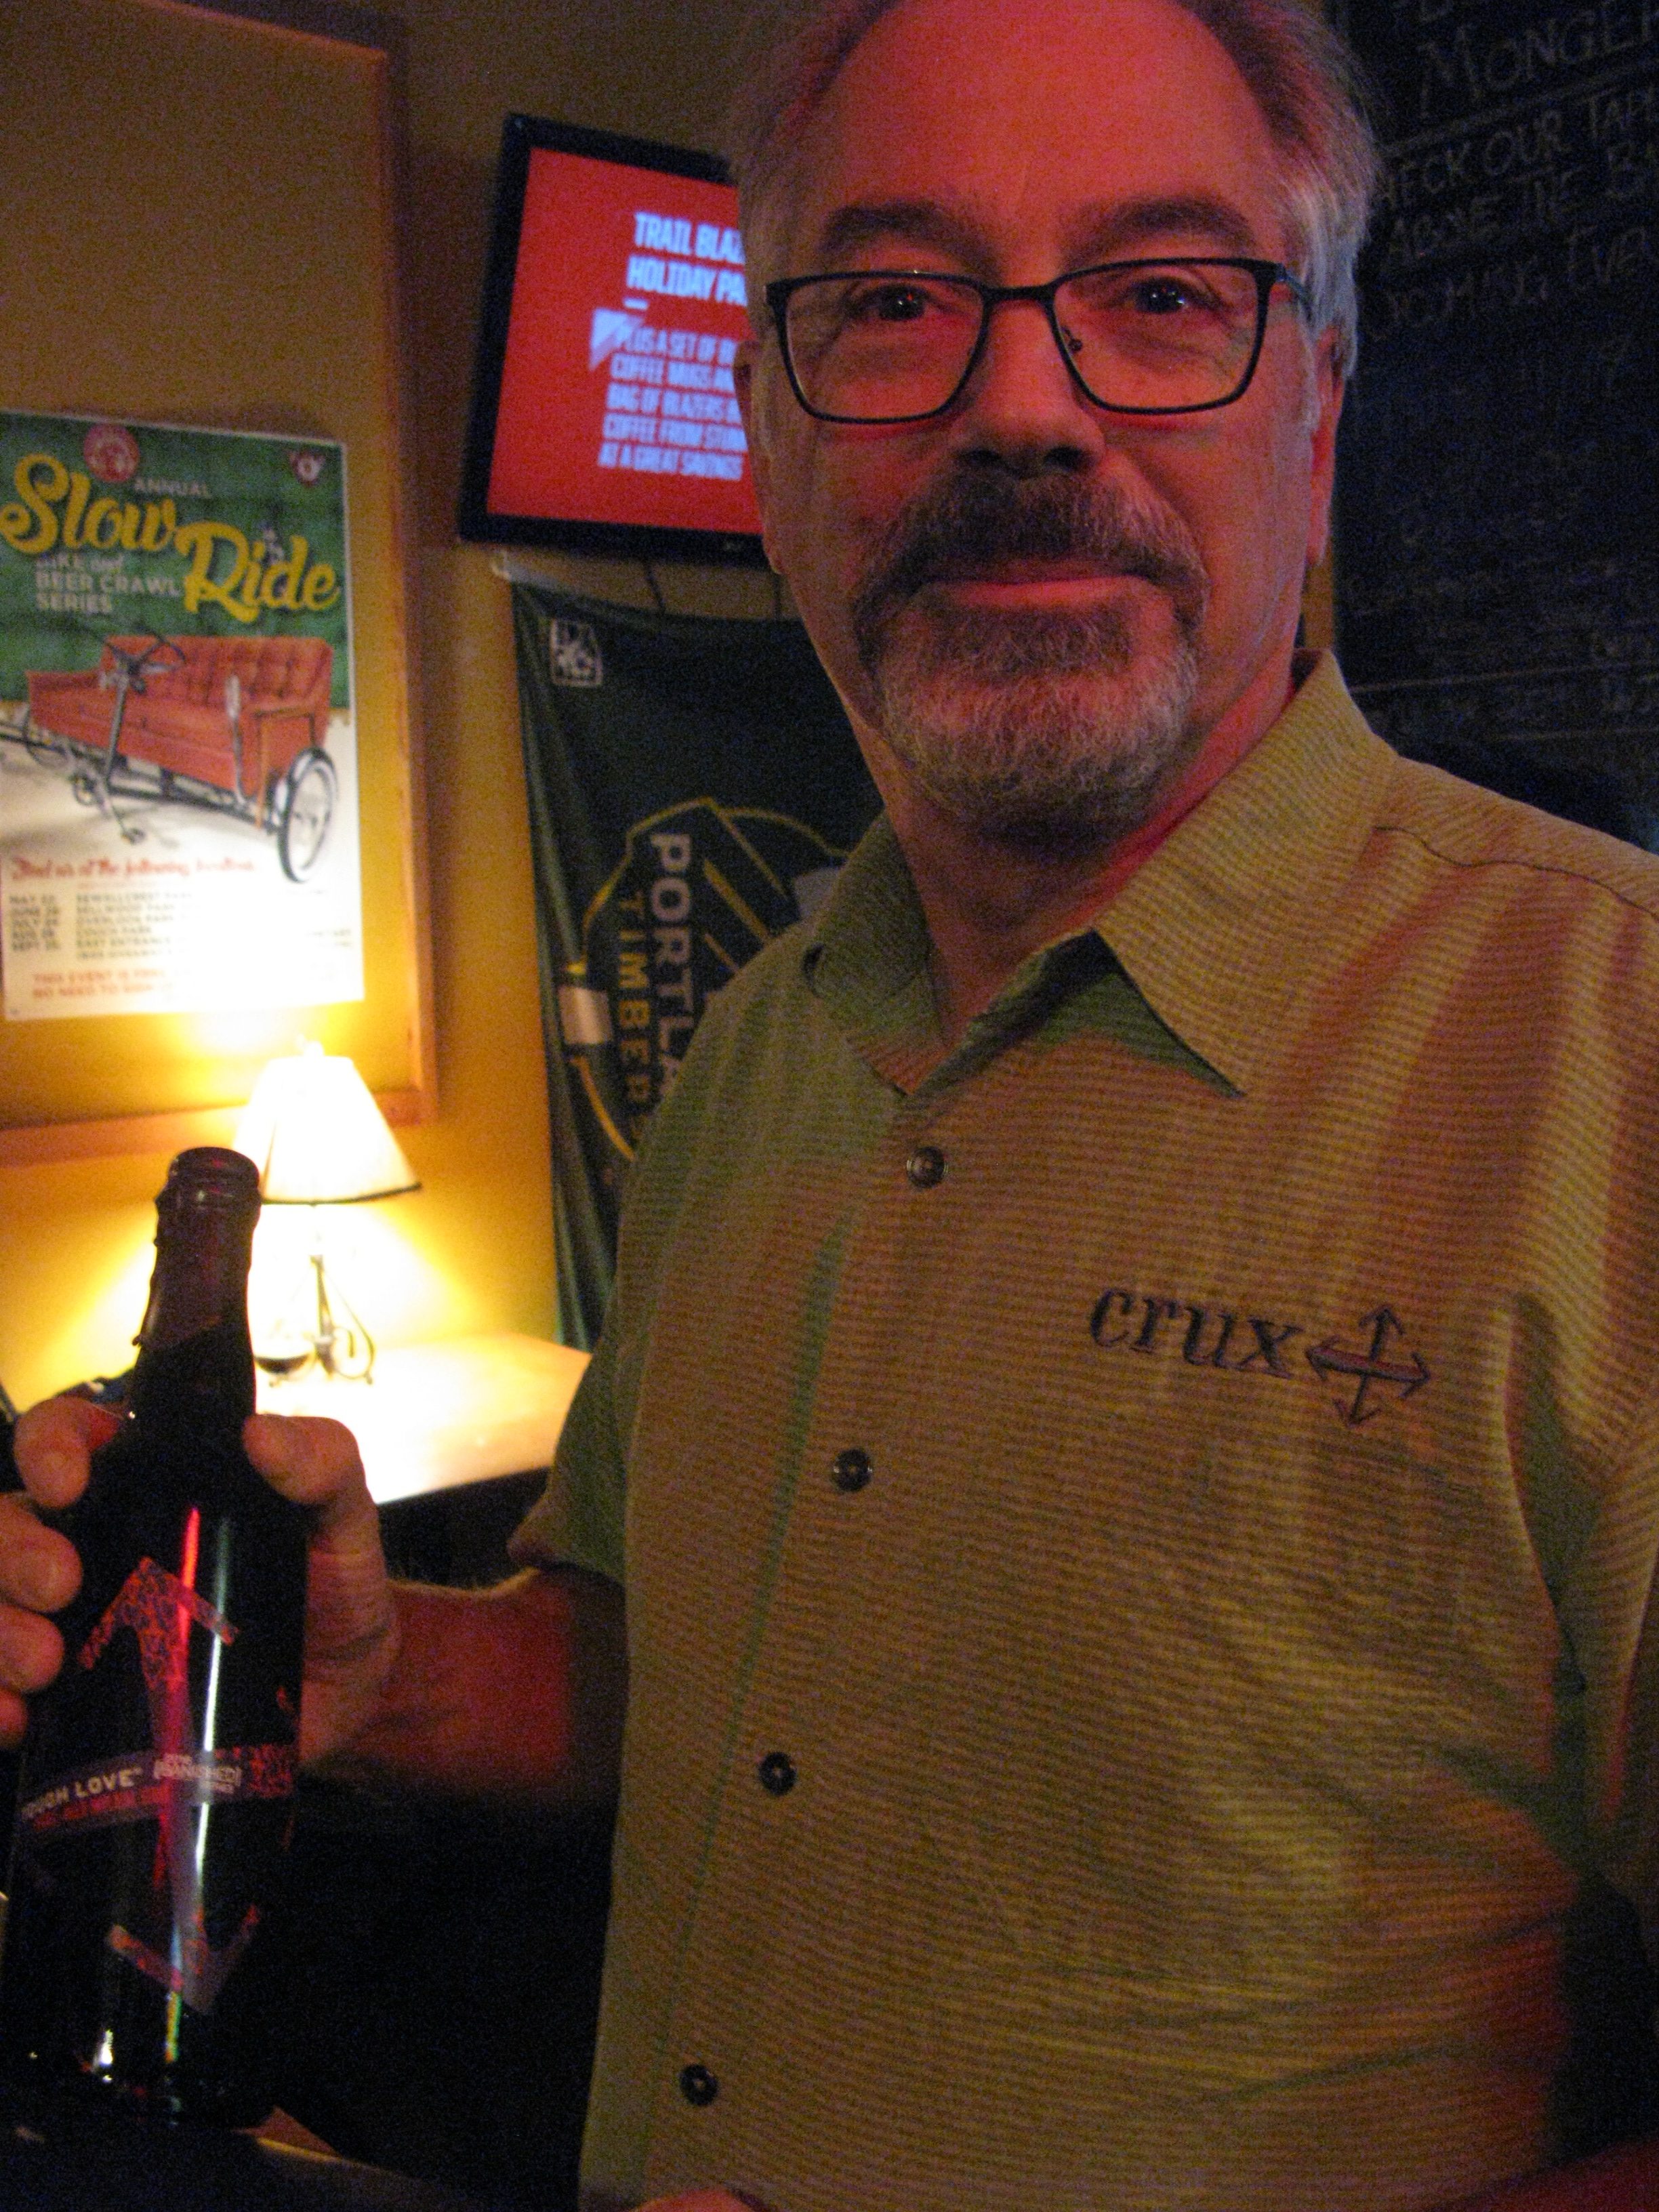 Larry Sidor and his BANISHED Tough Love at The BeerMongers. (FoystonFoto)